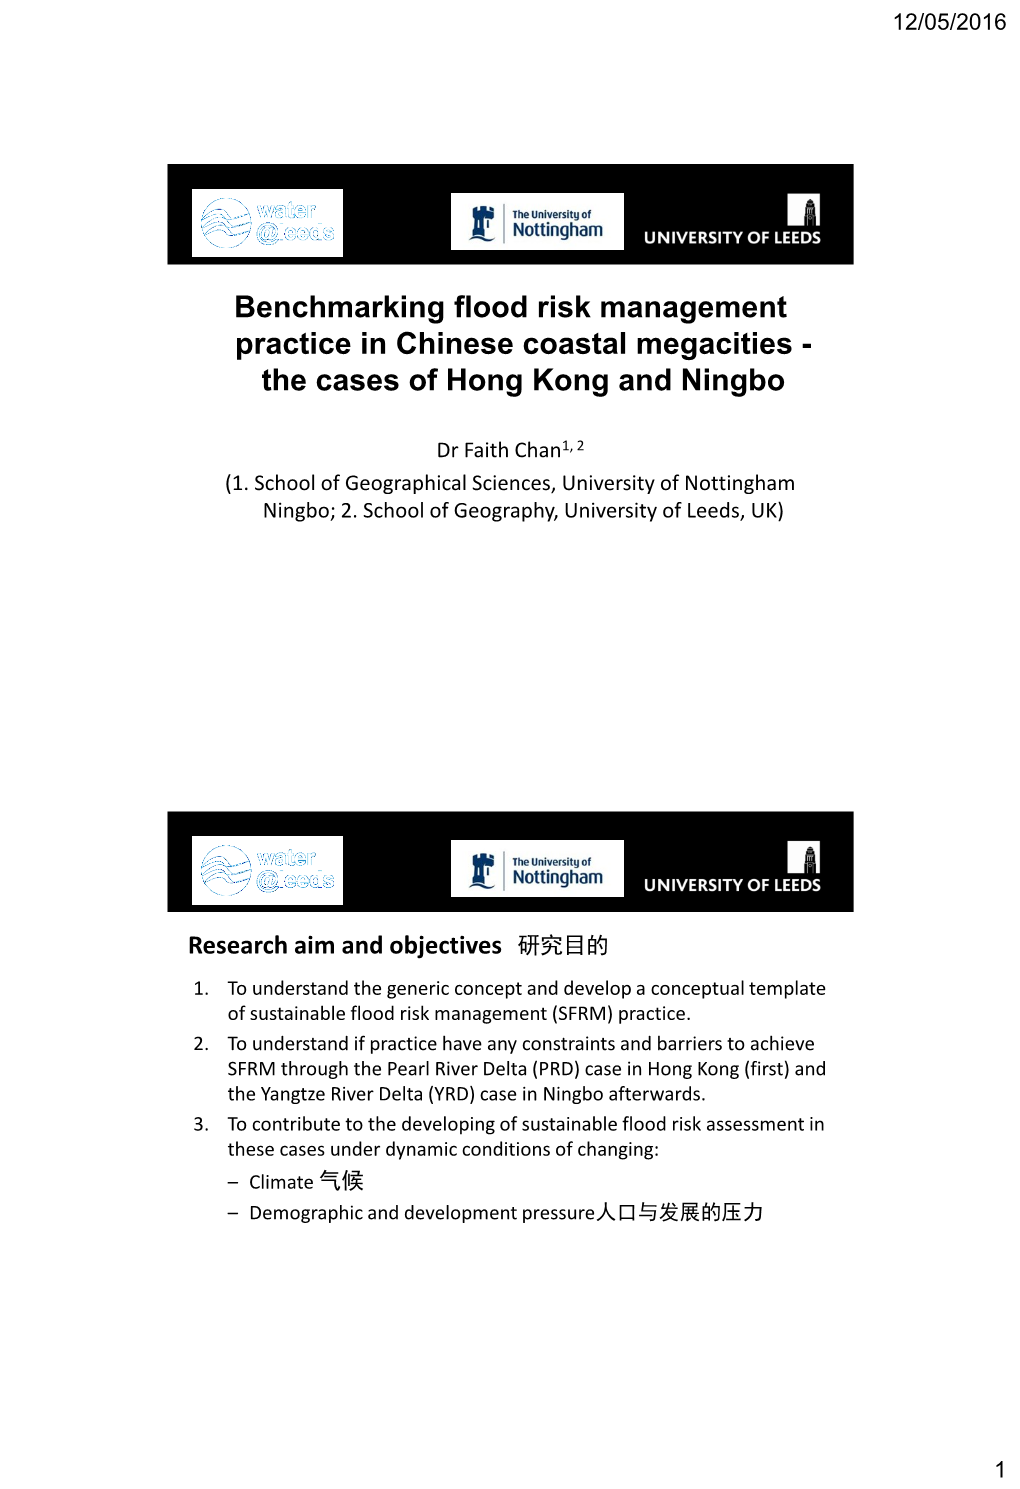 Benchmarking Flood Risk Management Practice in Chinese Coastal Megacities - the Cases of Hong Kong and Ningbo